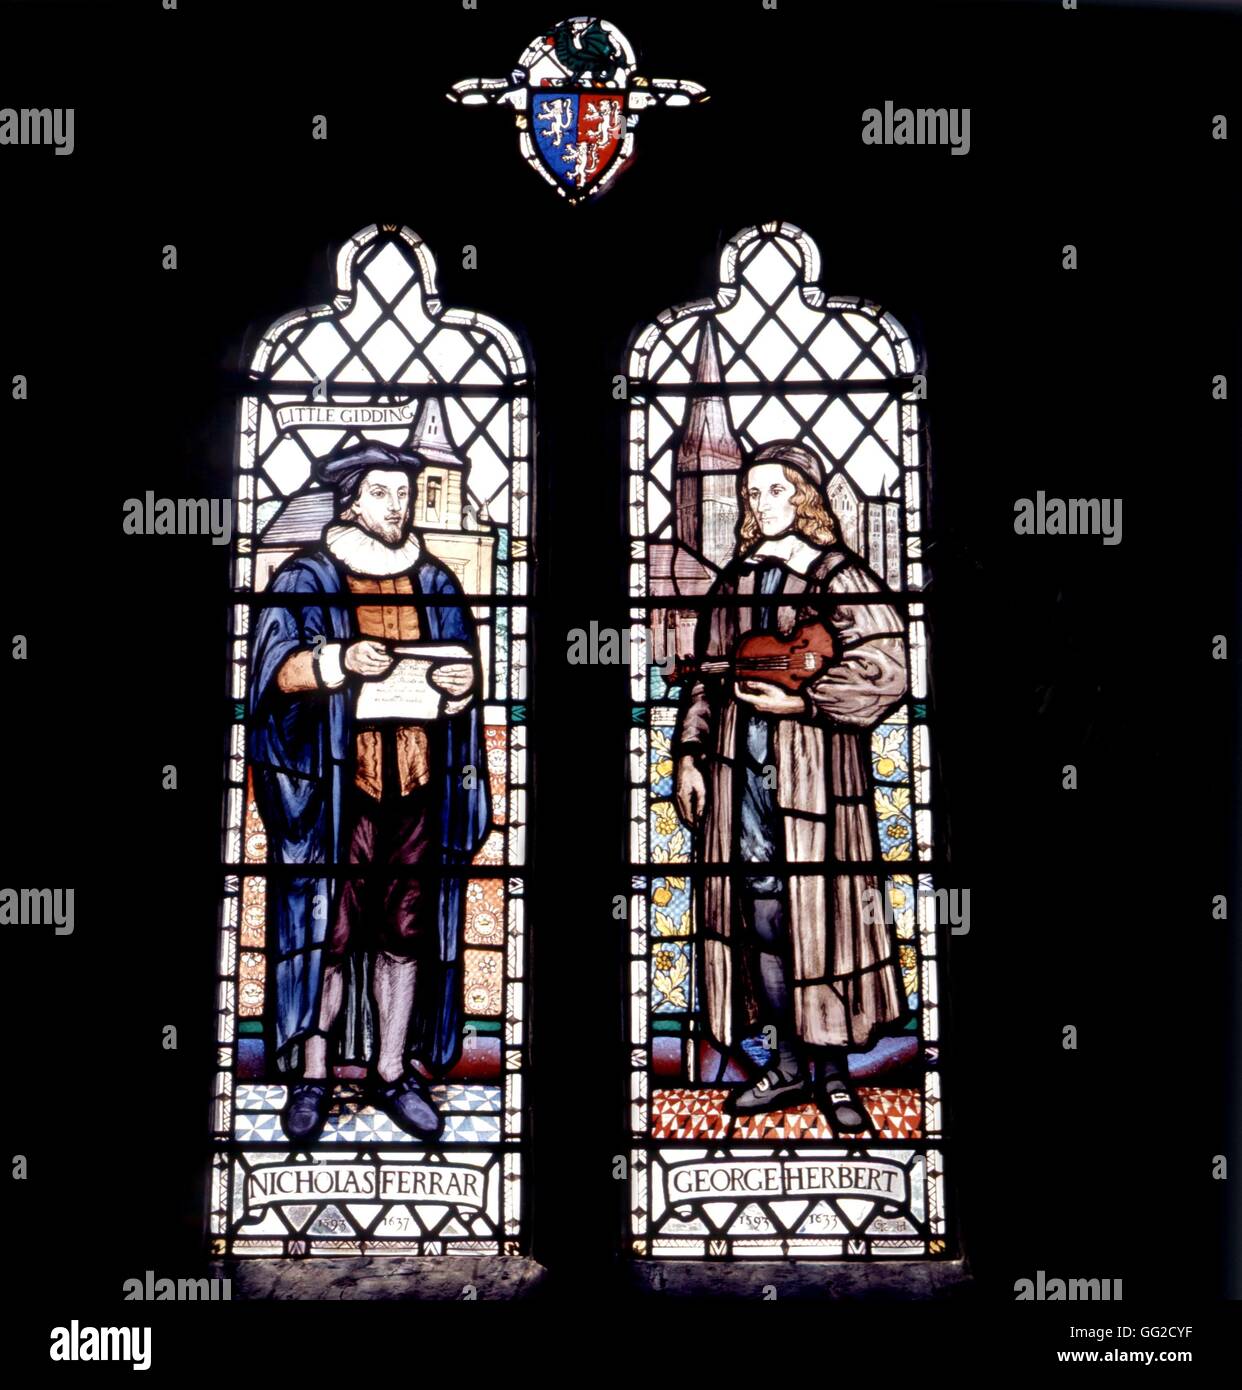 Standrew church at Bonninton. Nicolas Ferrar and George Herbert, members of a protestant community founded in 1625 17th century England Stock Photo